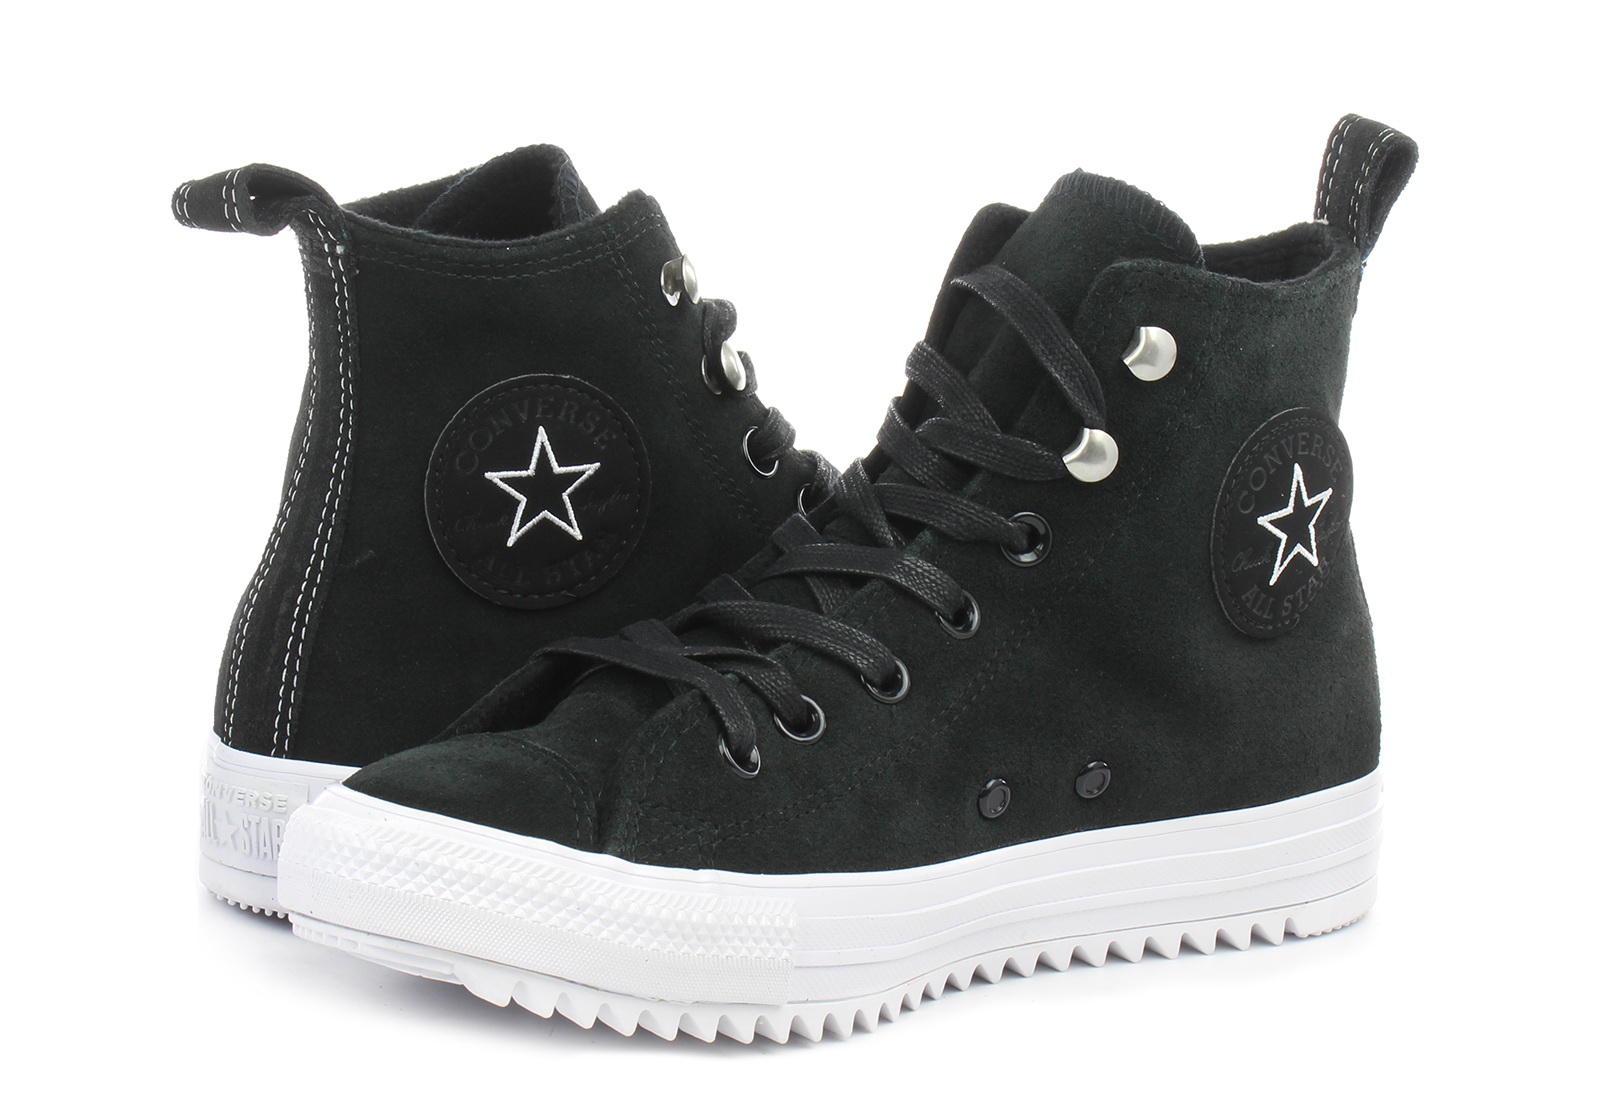 Ligadura Lima Anuncio Converse High trainers - Chuck Taylor All Star Hiker Boot Hi - 565236C -  Online shop for sneakers, shoes and boots